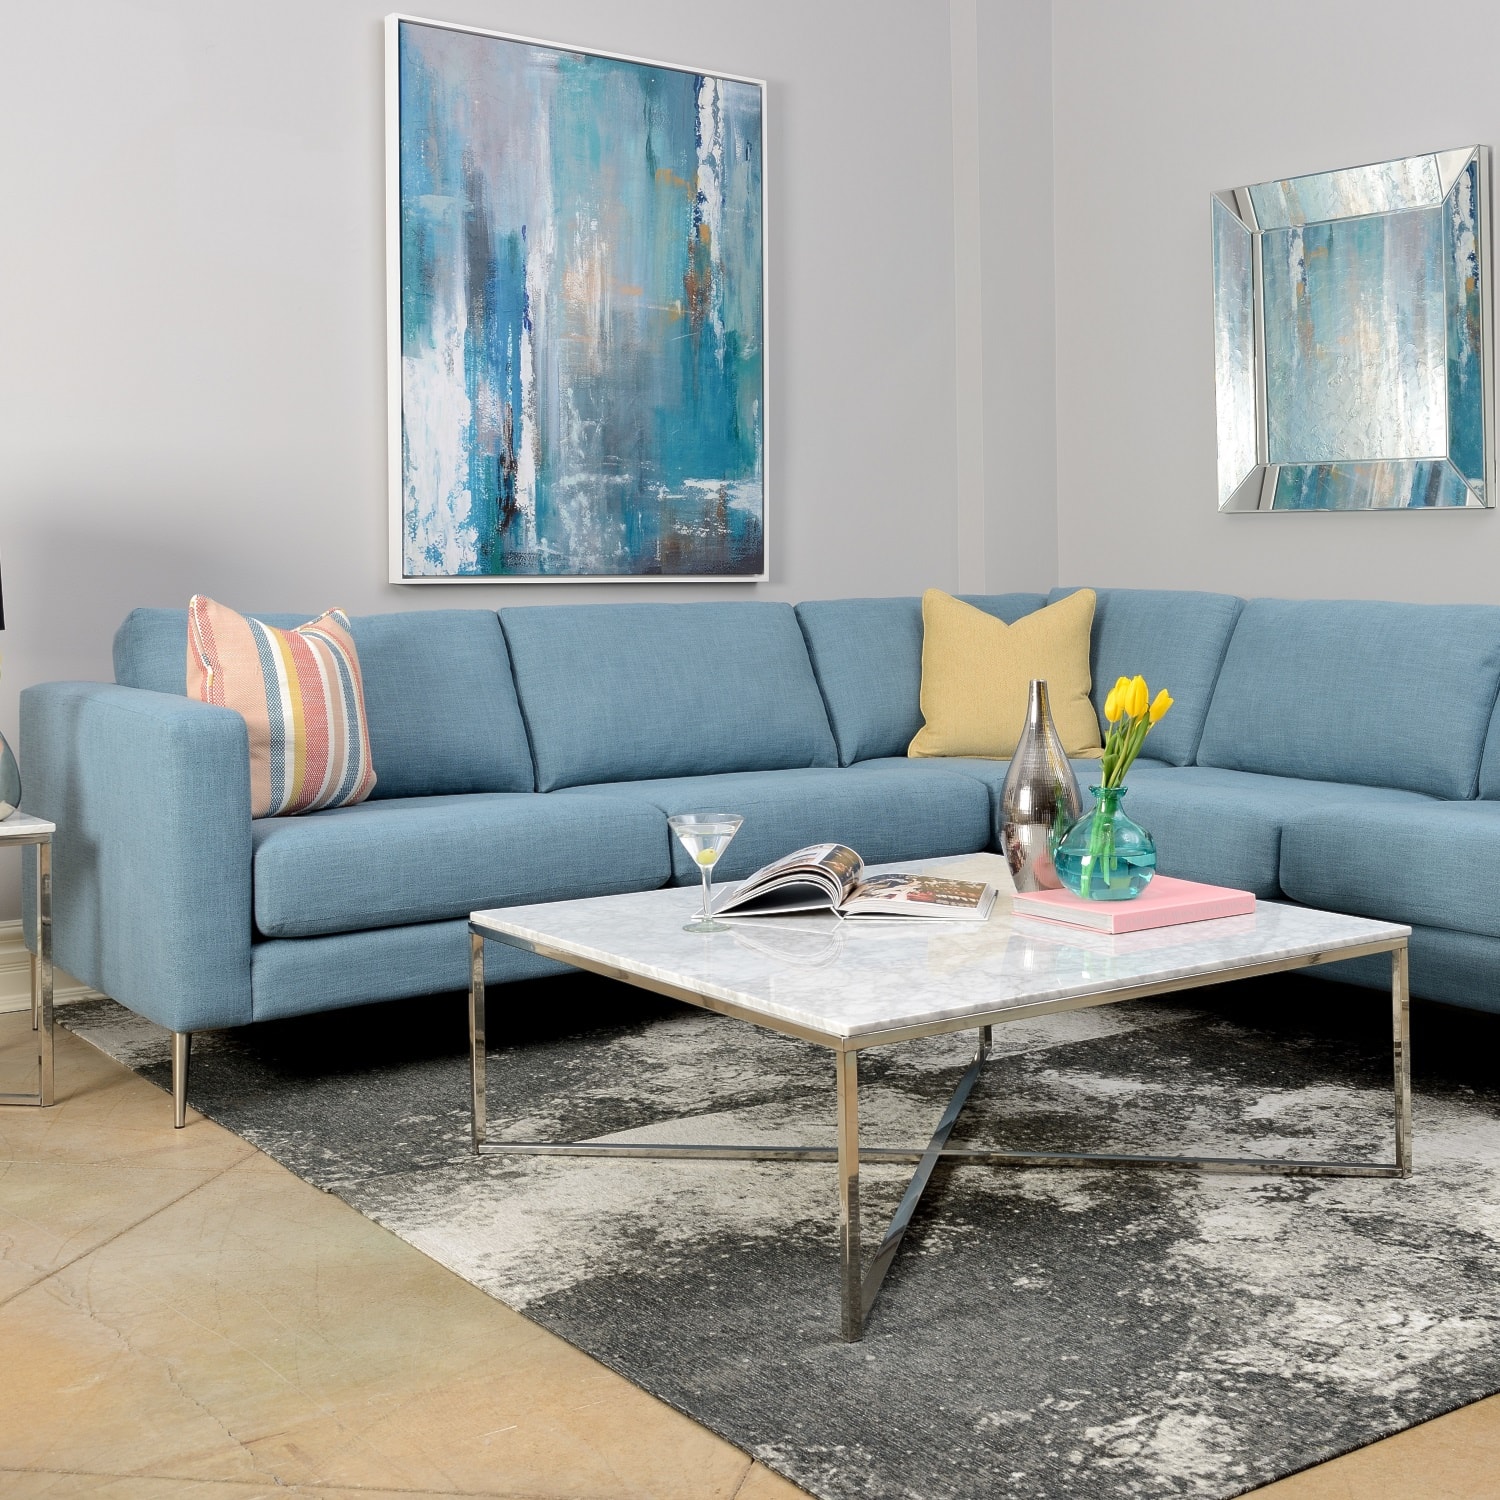 Blue sectional with colourful toss cushions